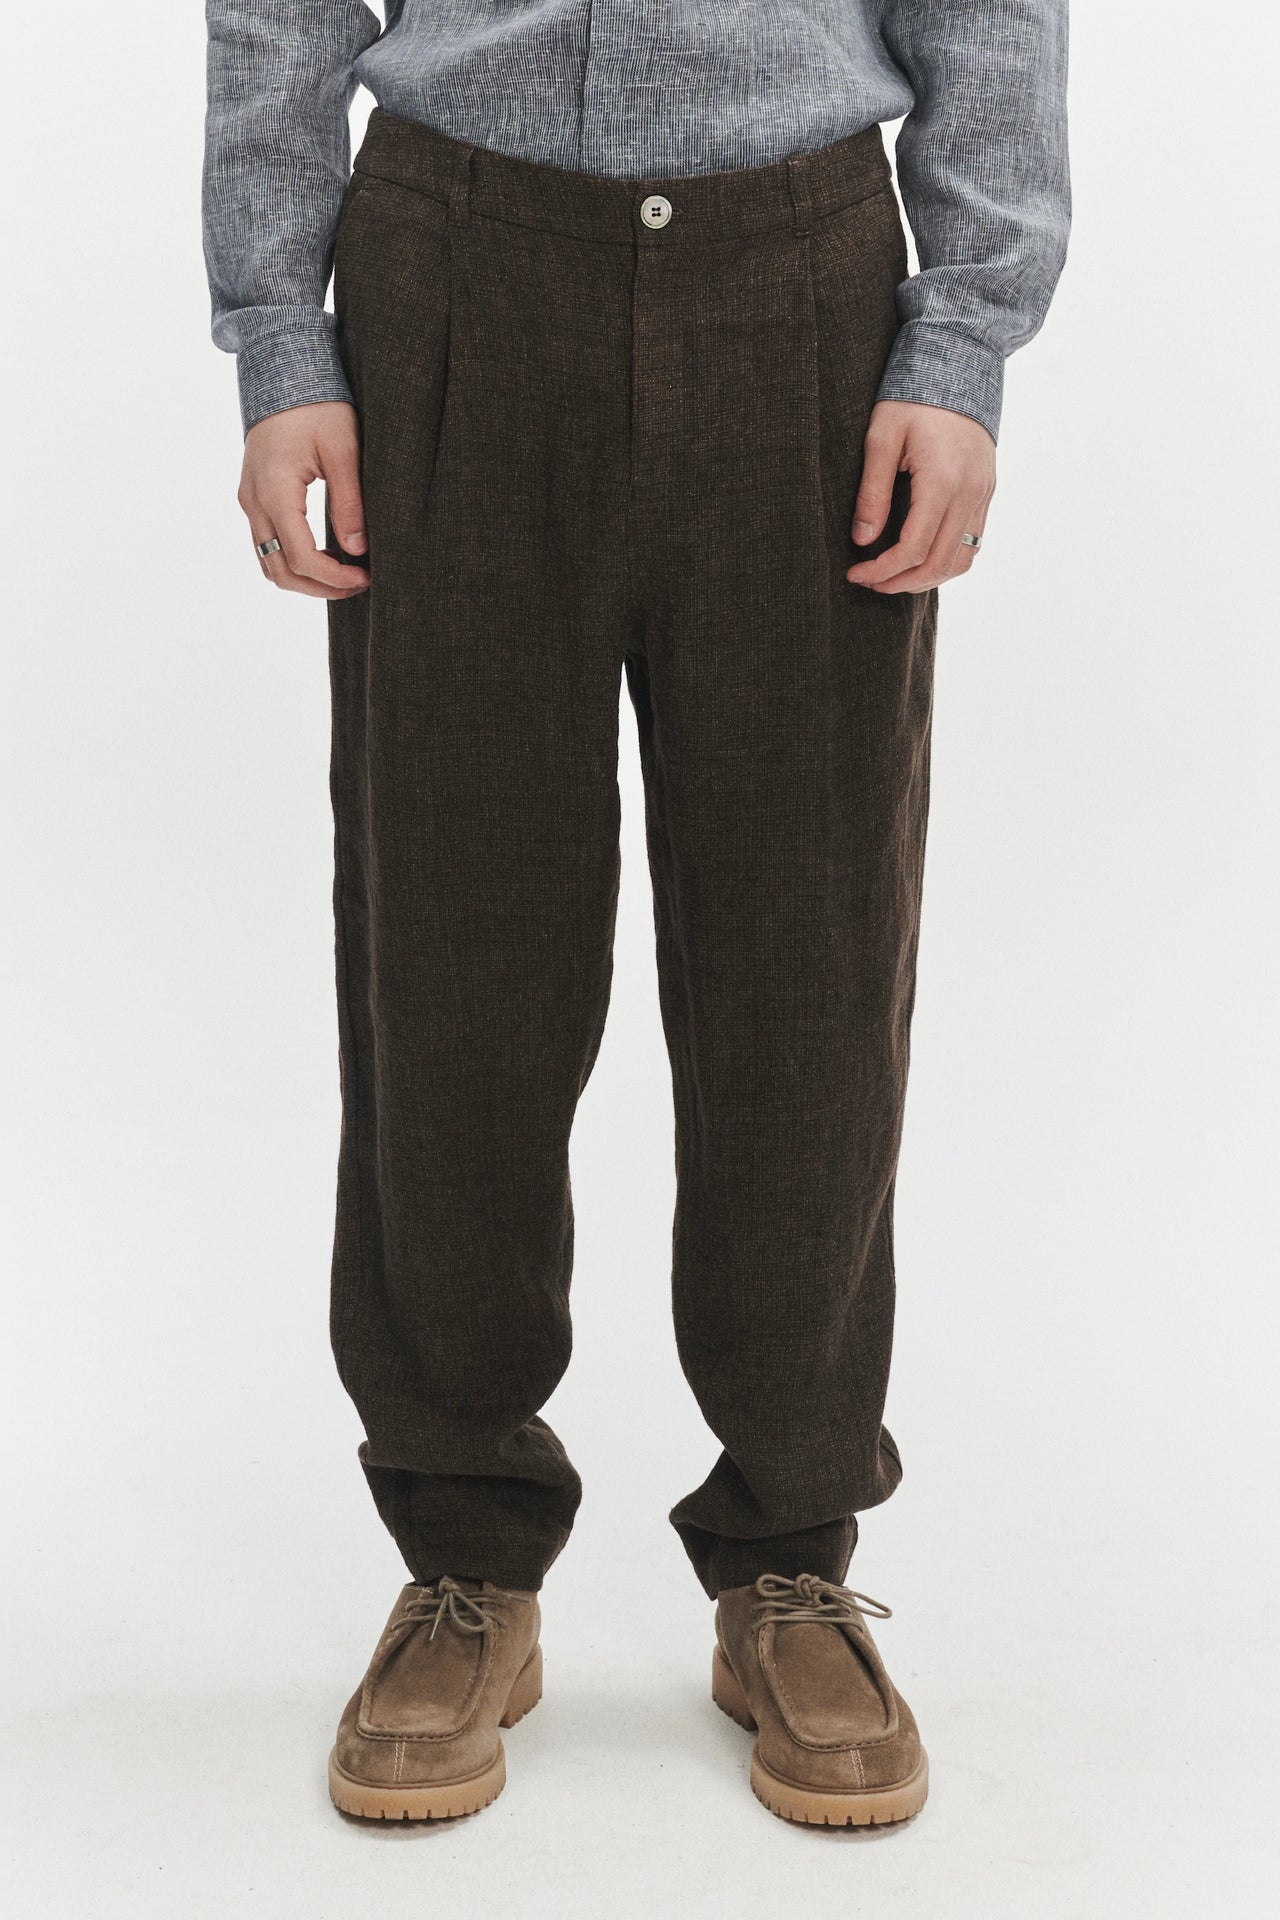 Genuine Trousers in a Brown Fluid and Structured Italian Linen Crepe